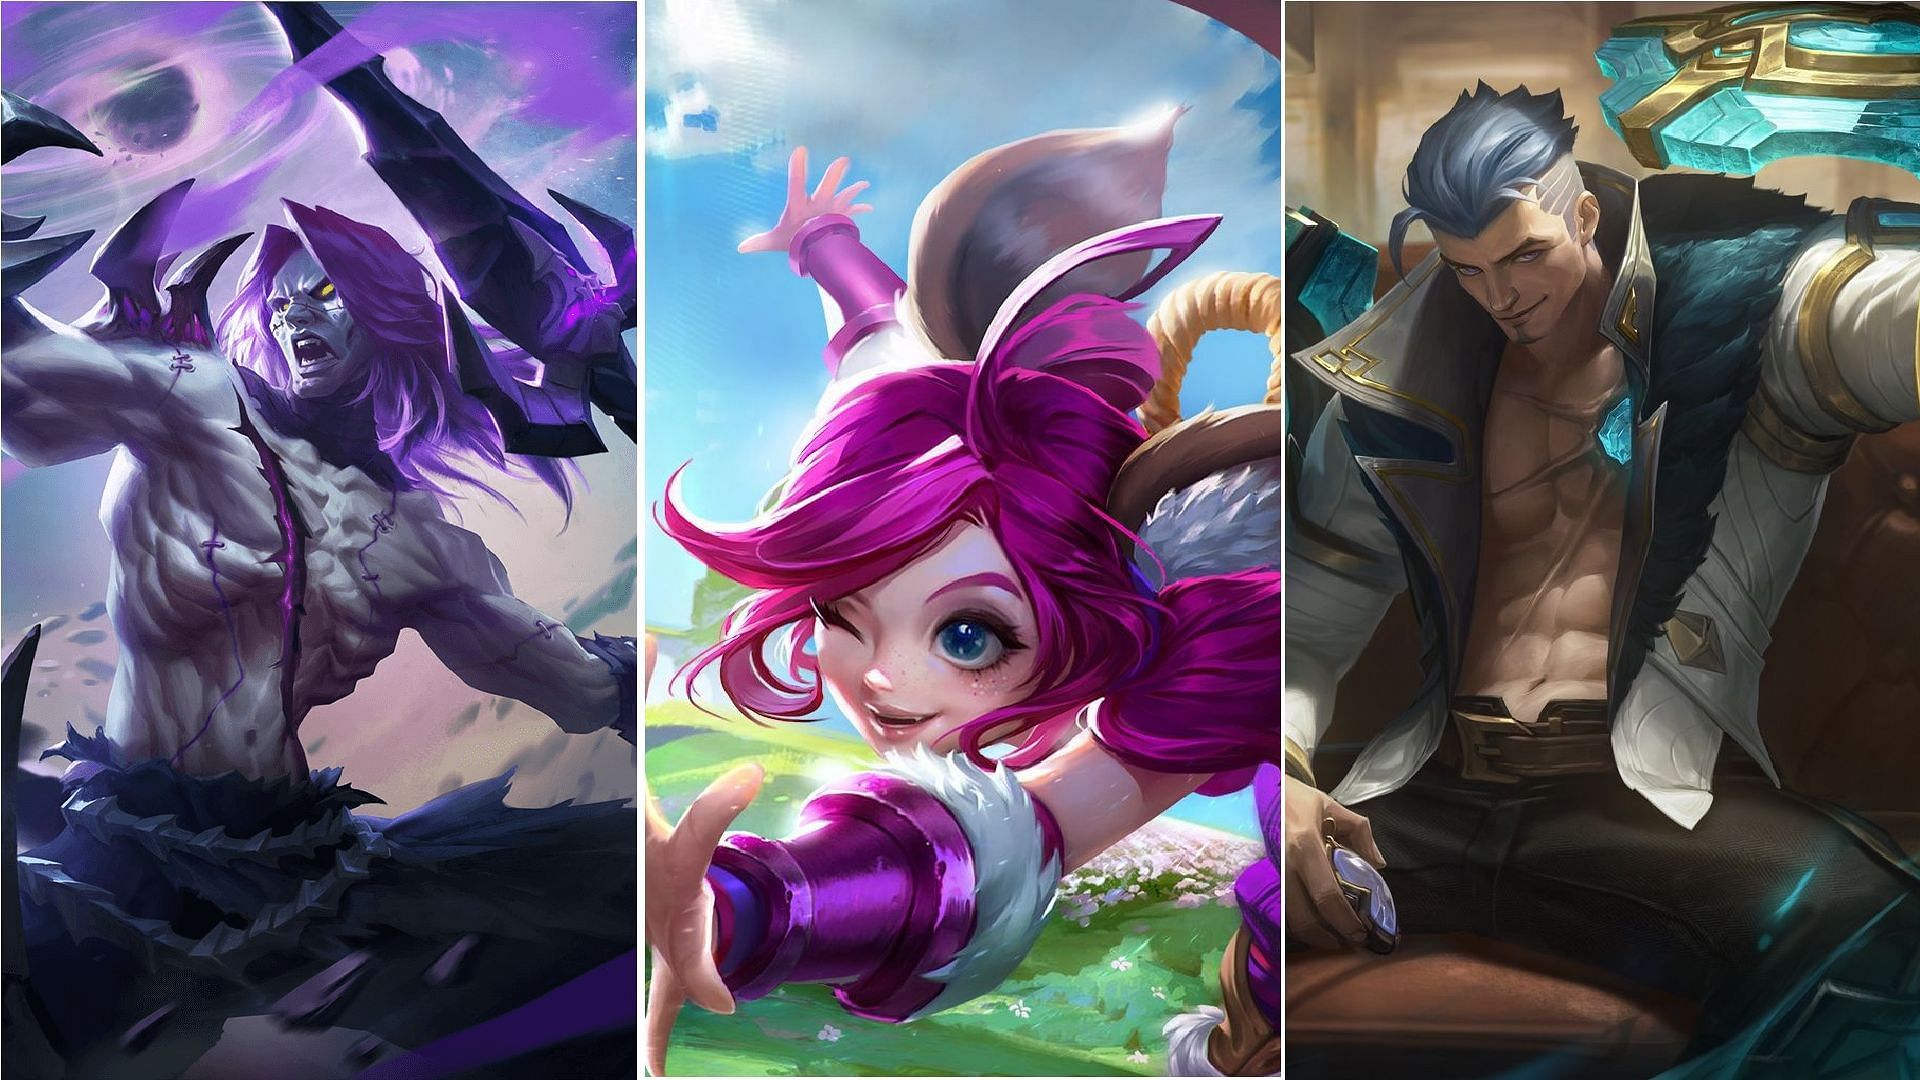 Moskov, Nana, and Fredrinn are all getting adjusted in the latest MLBB patch update (Image via Moonton games)